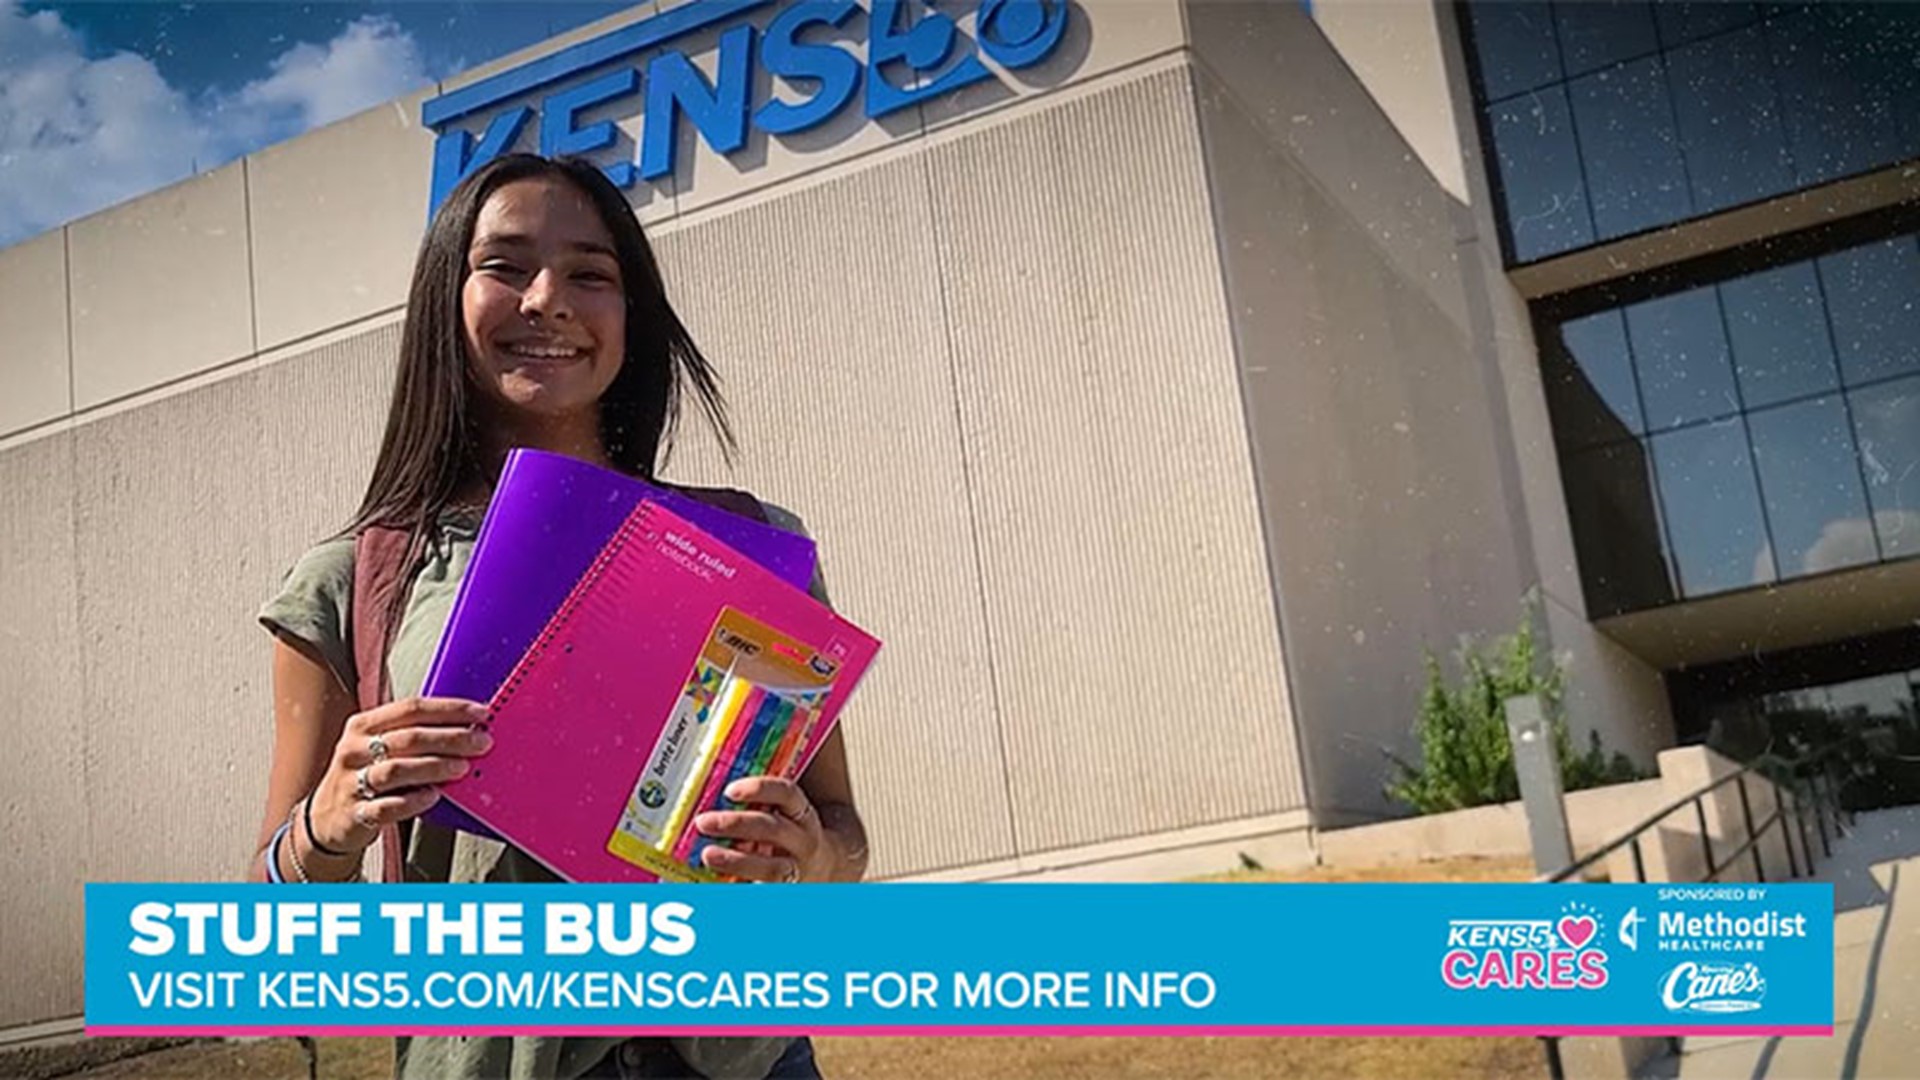 Your donations help thousands of San Antonio-area students get the school supplies they need to be successful.